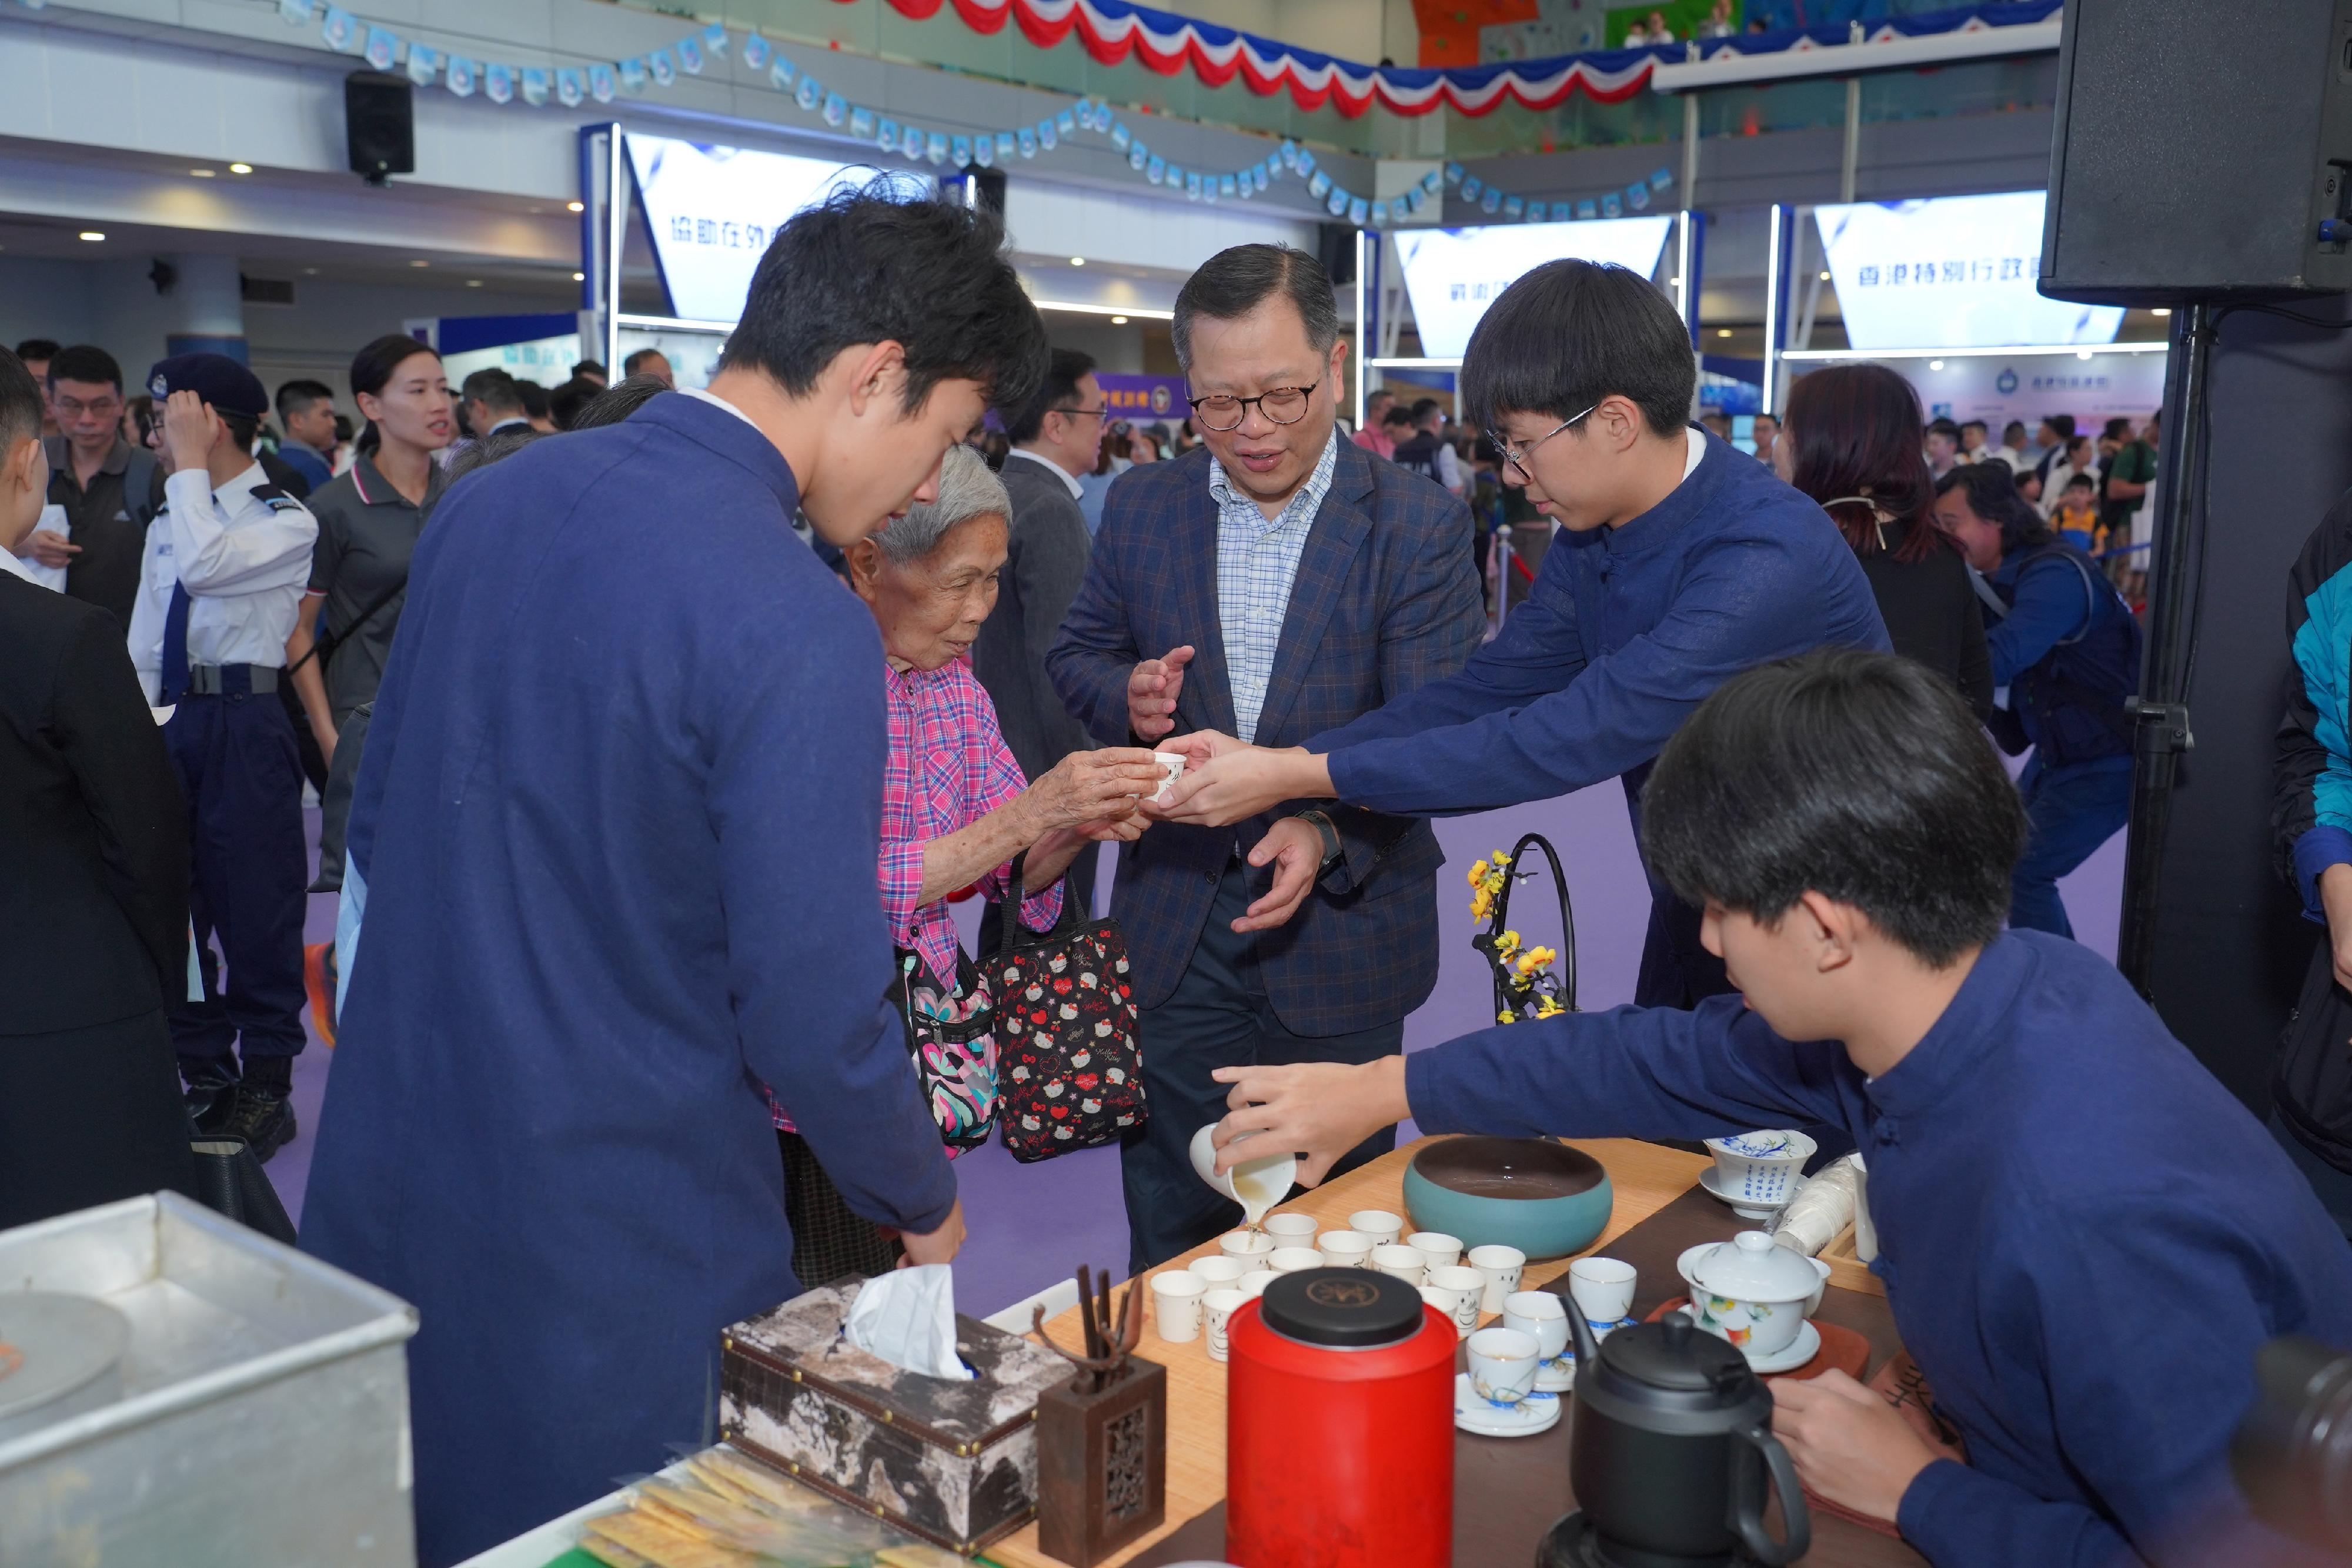 To support the National Security Education Day, the Immigration Service Institute of Training and Development held an open day today (April 13). Photo shows members of the Immigration Department Youth Leaders Corps promoting Chinese tea artistry and Hong Kong local food culture to members of the public, enriching their understanding of the major field - cultural security.